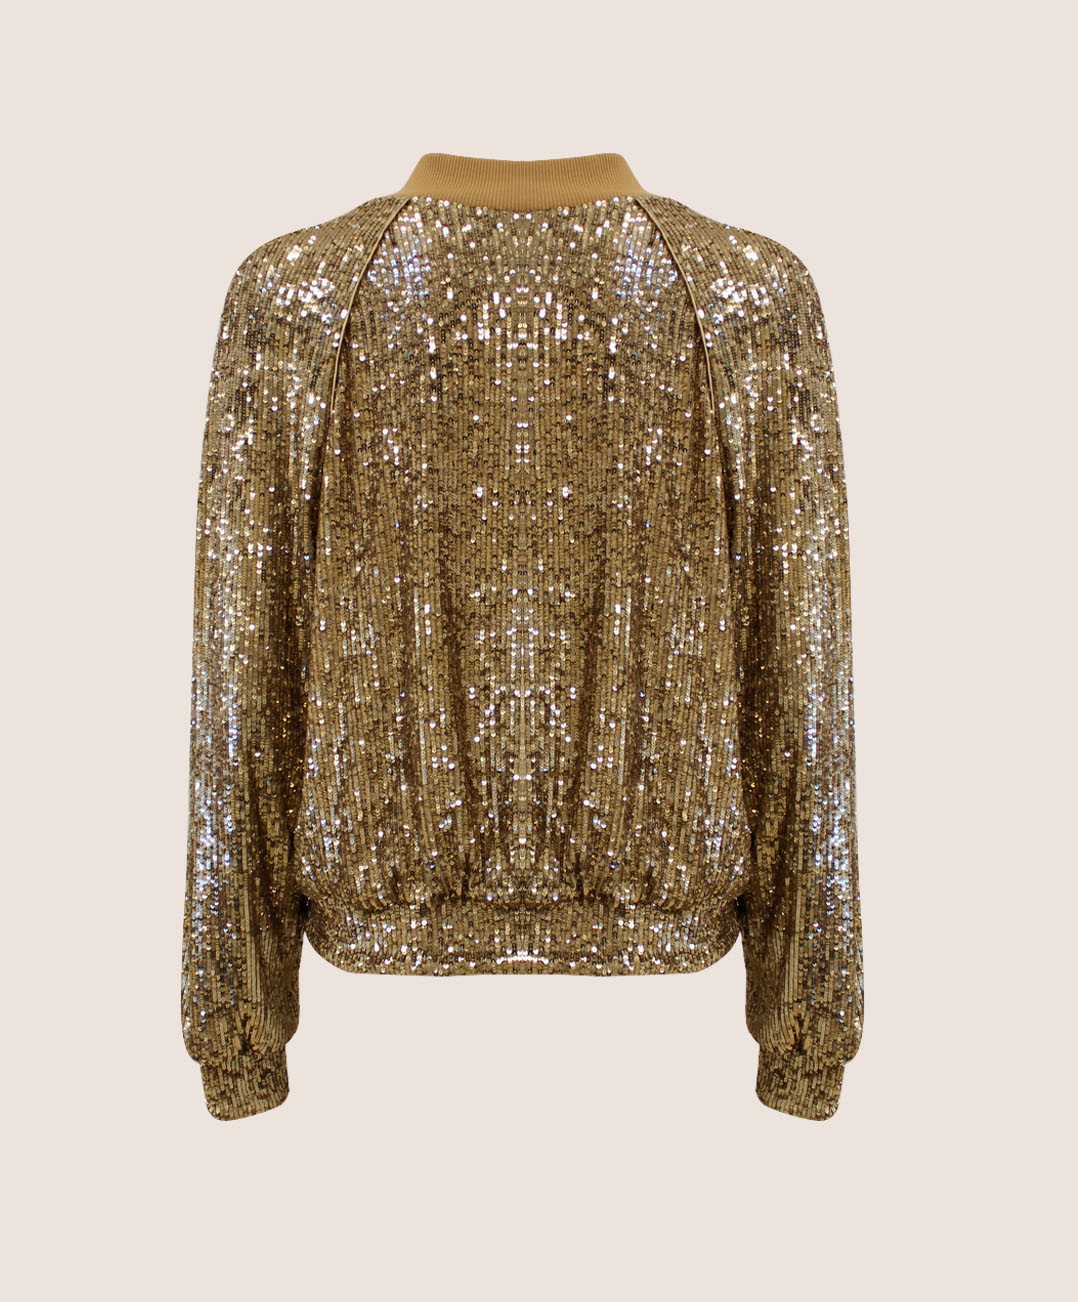 Blanka The Label Rose Gold Sequin Duster Jacket. S. NWT